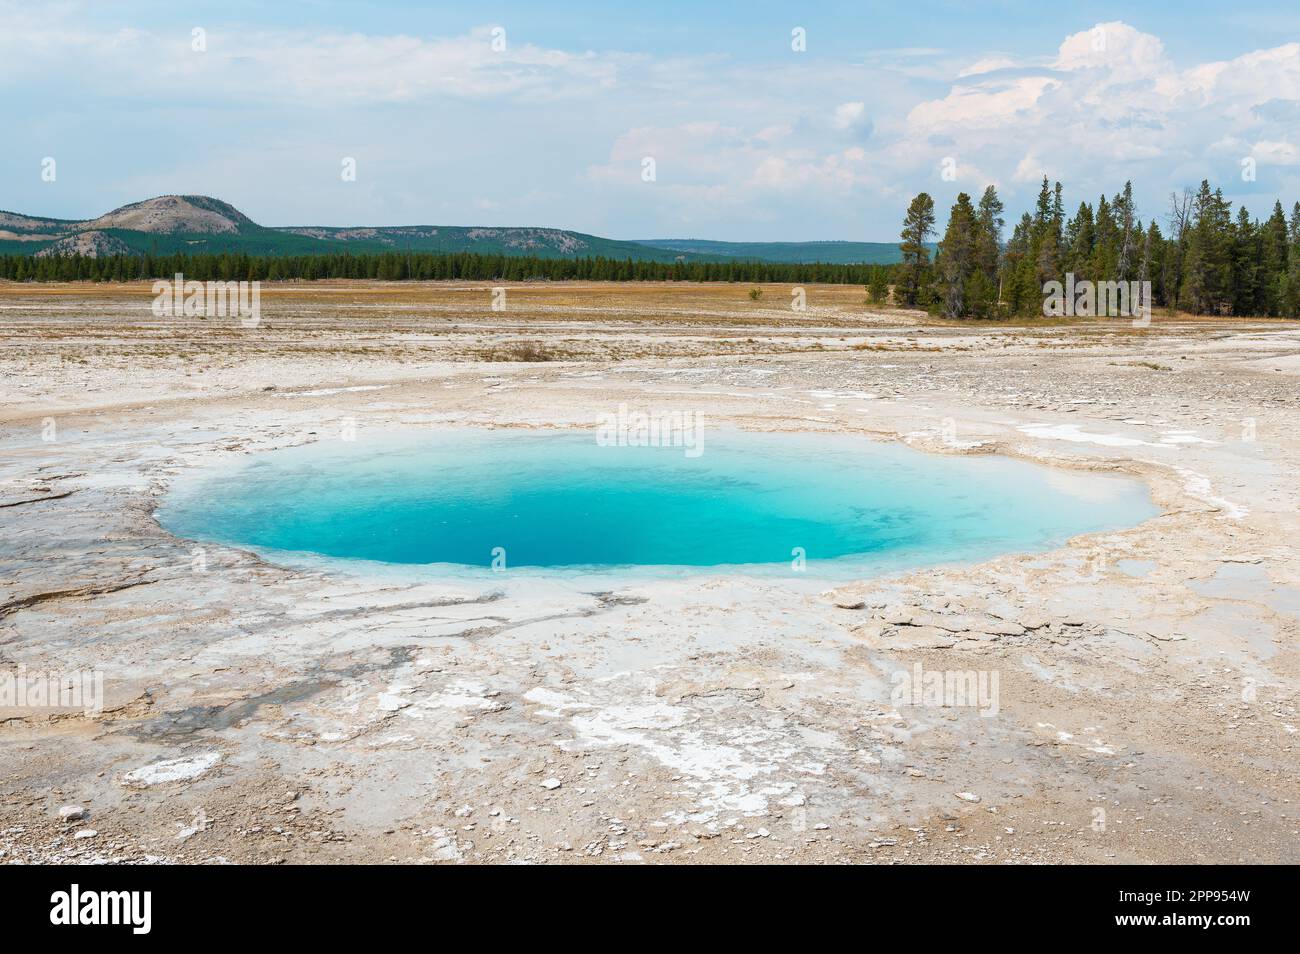 Blue Hot Spring hole, Midway geyser Basin, parc national de Yellowstone, Wyoming, États-Unis. Banque D'Images